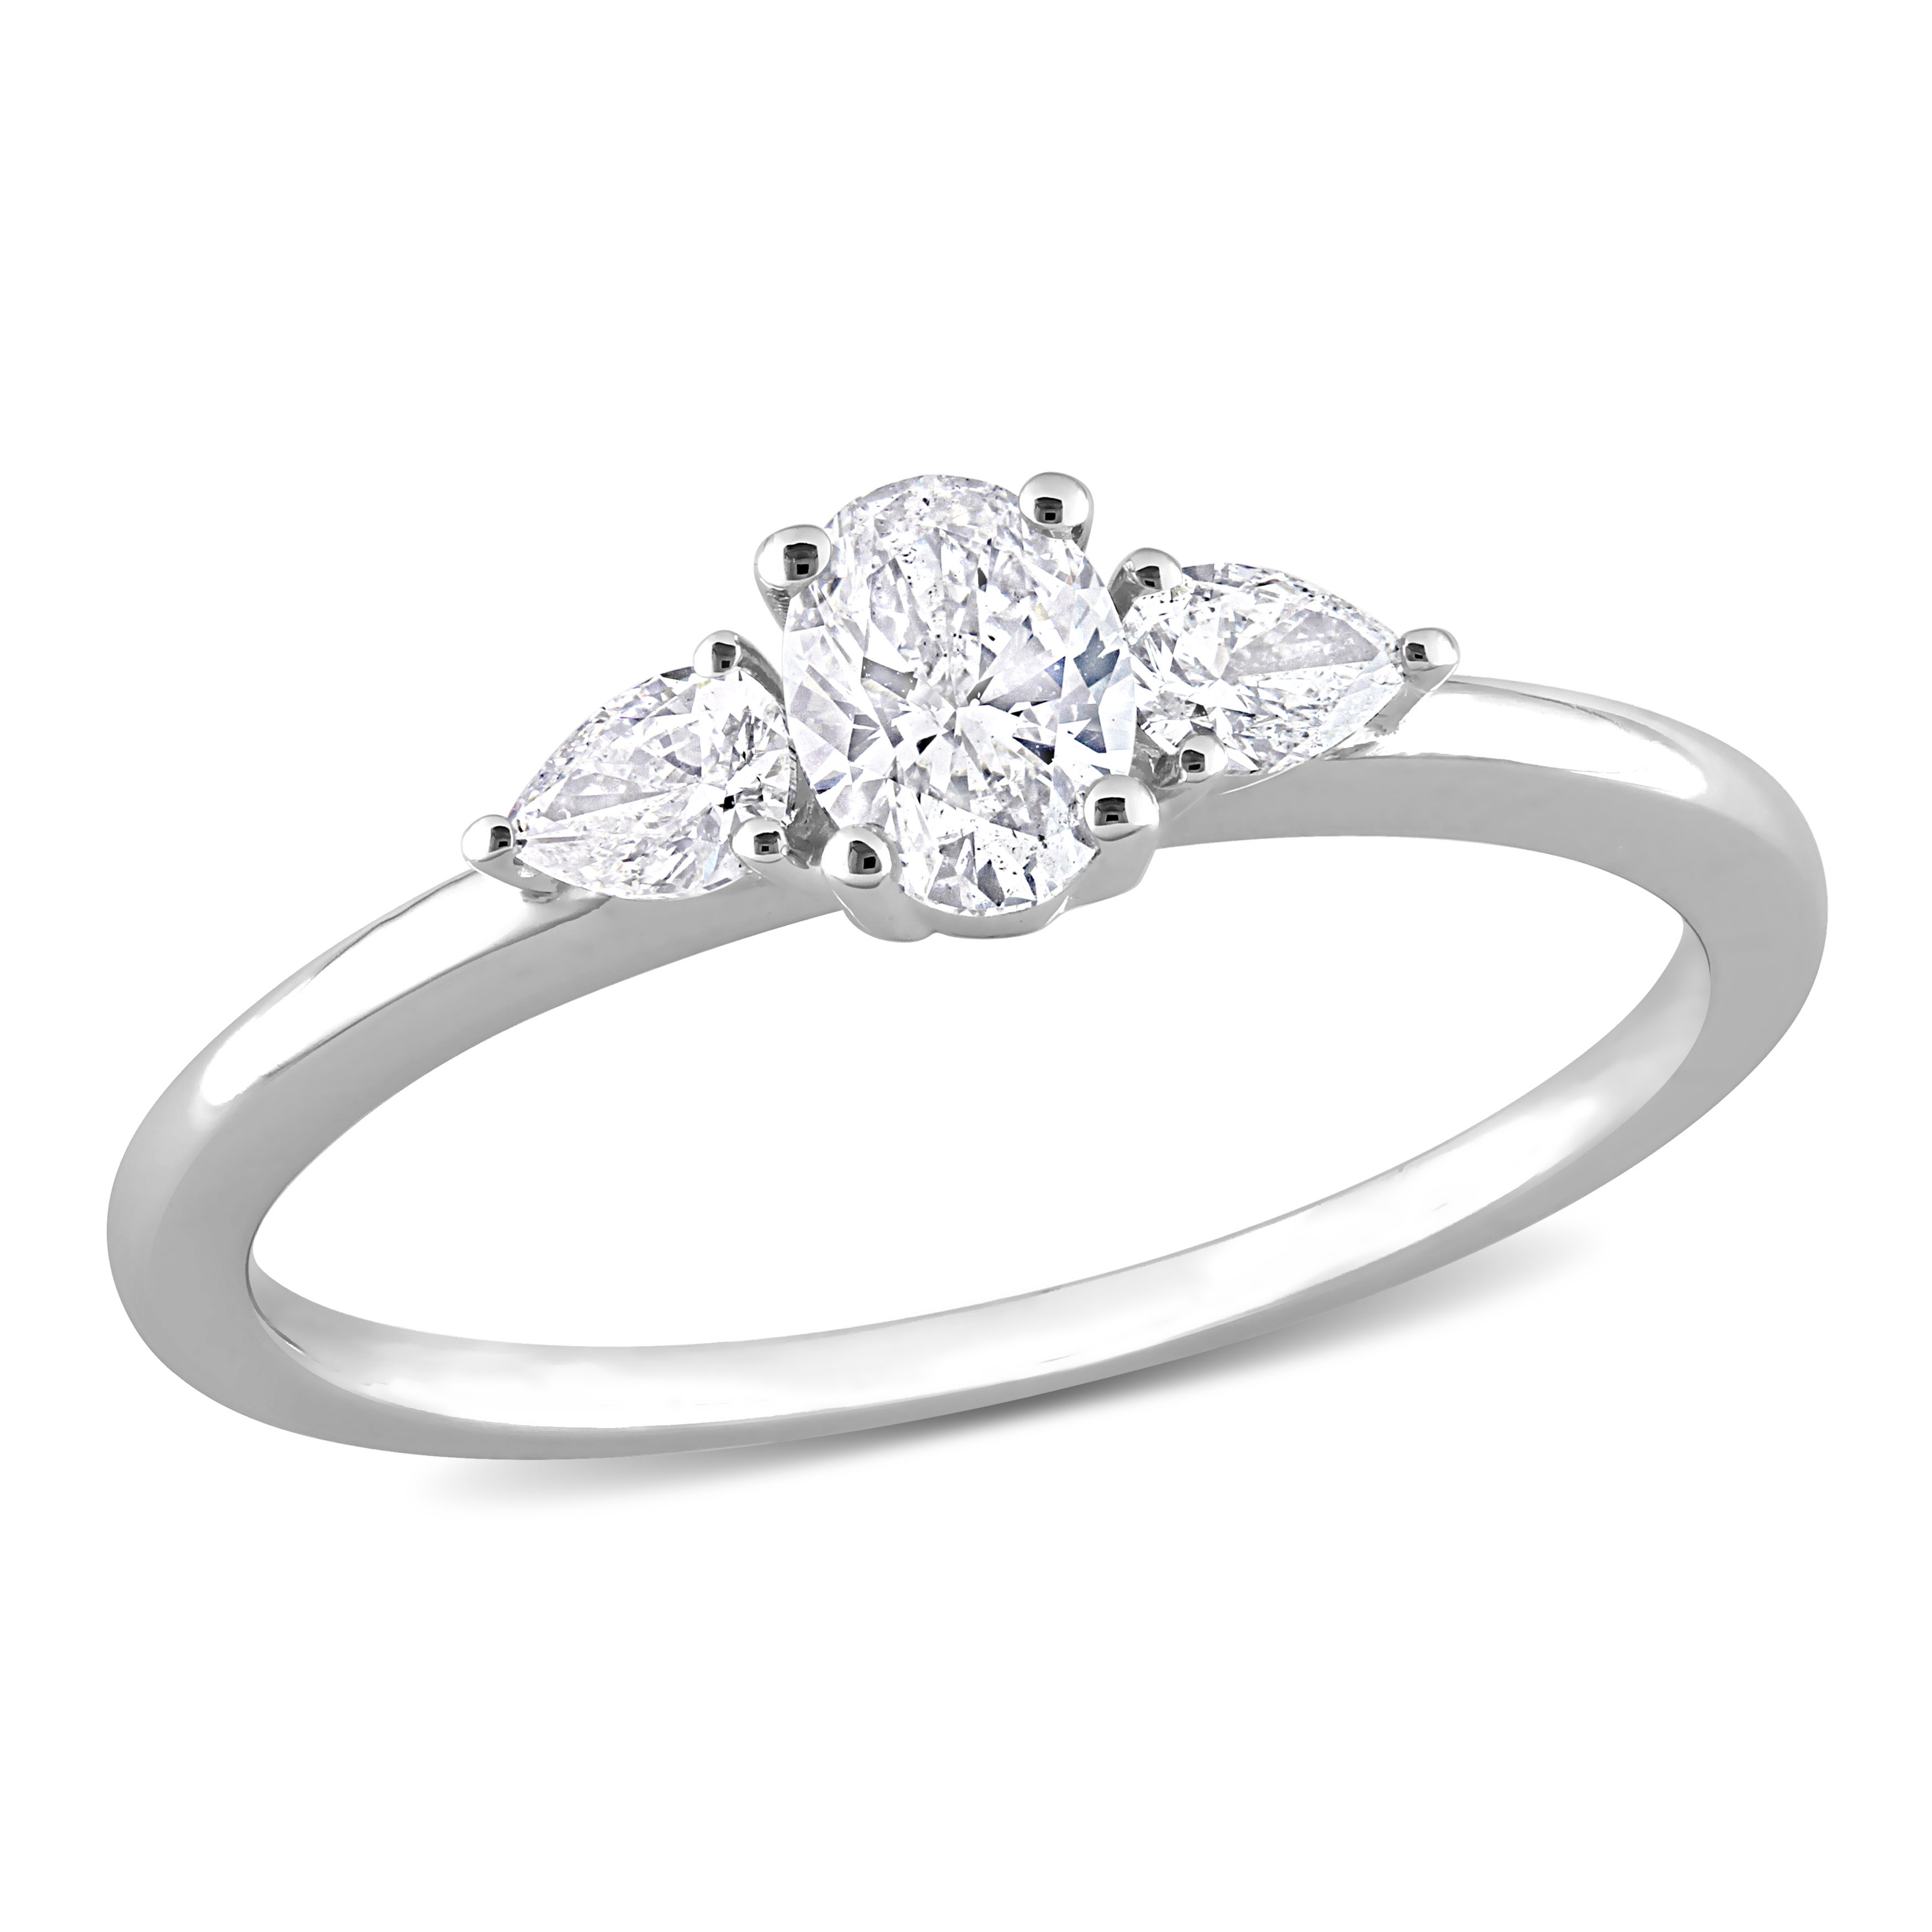 1/2 CT TW Oval and Pear Diamond 3-stone Engagement Ring in 14k White Gold